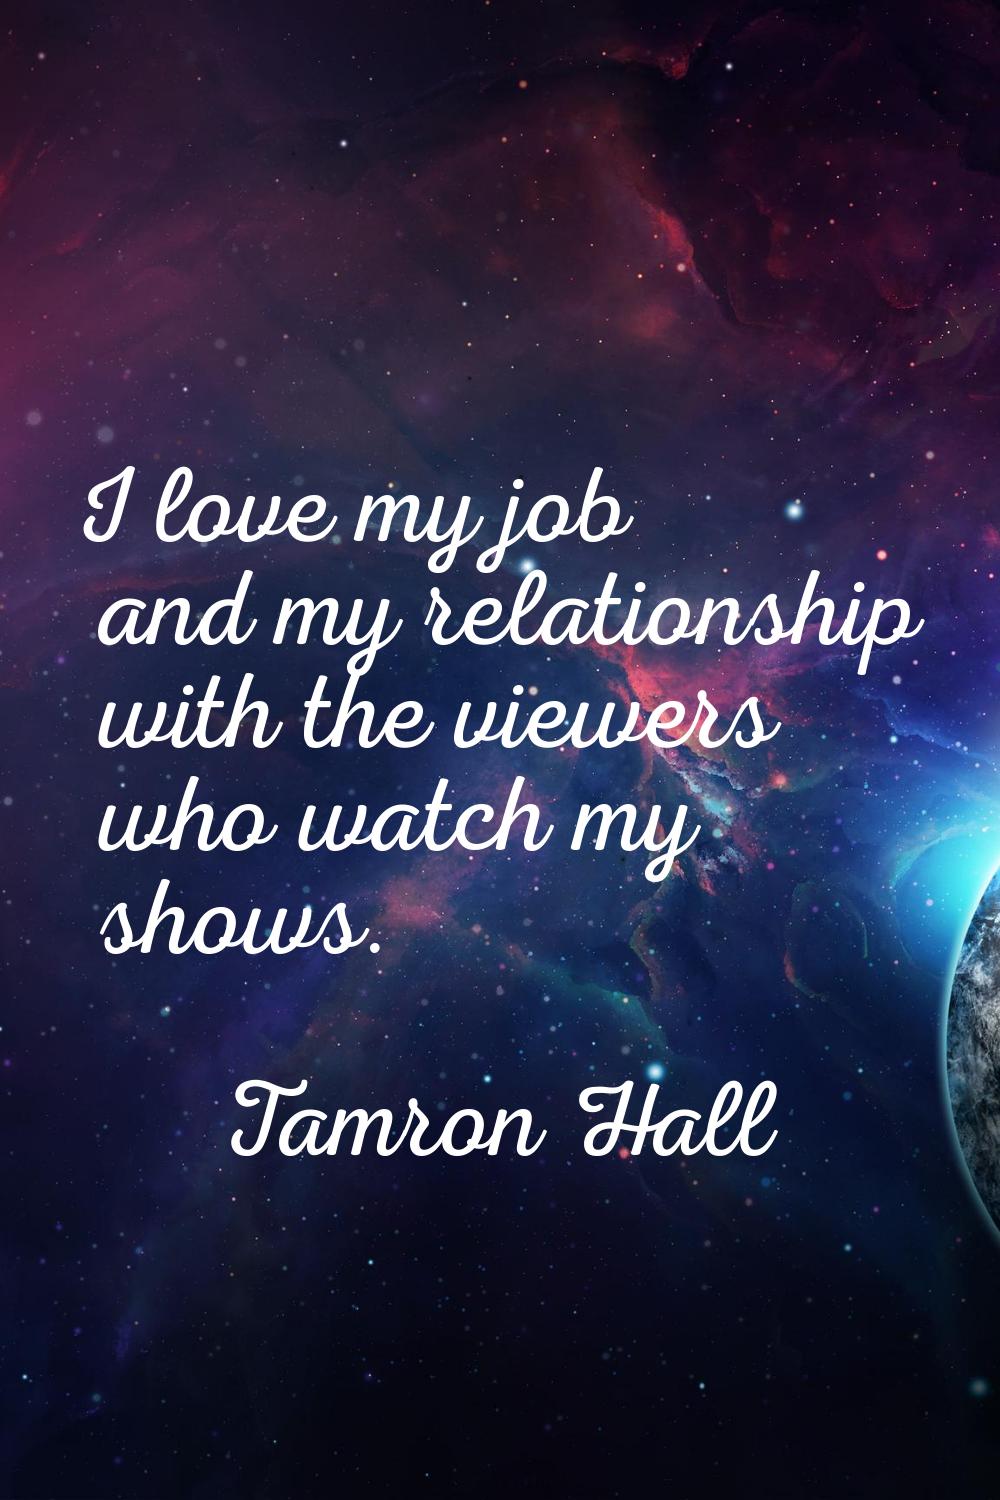 I love my job and my relationship with the viewers who watch my shows.